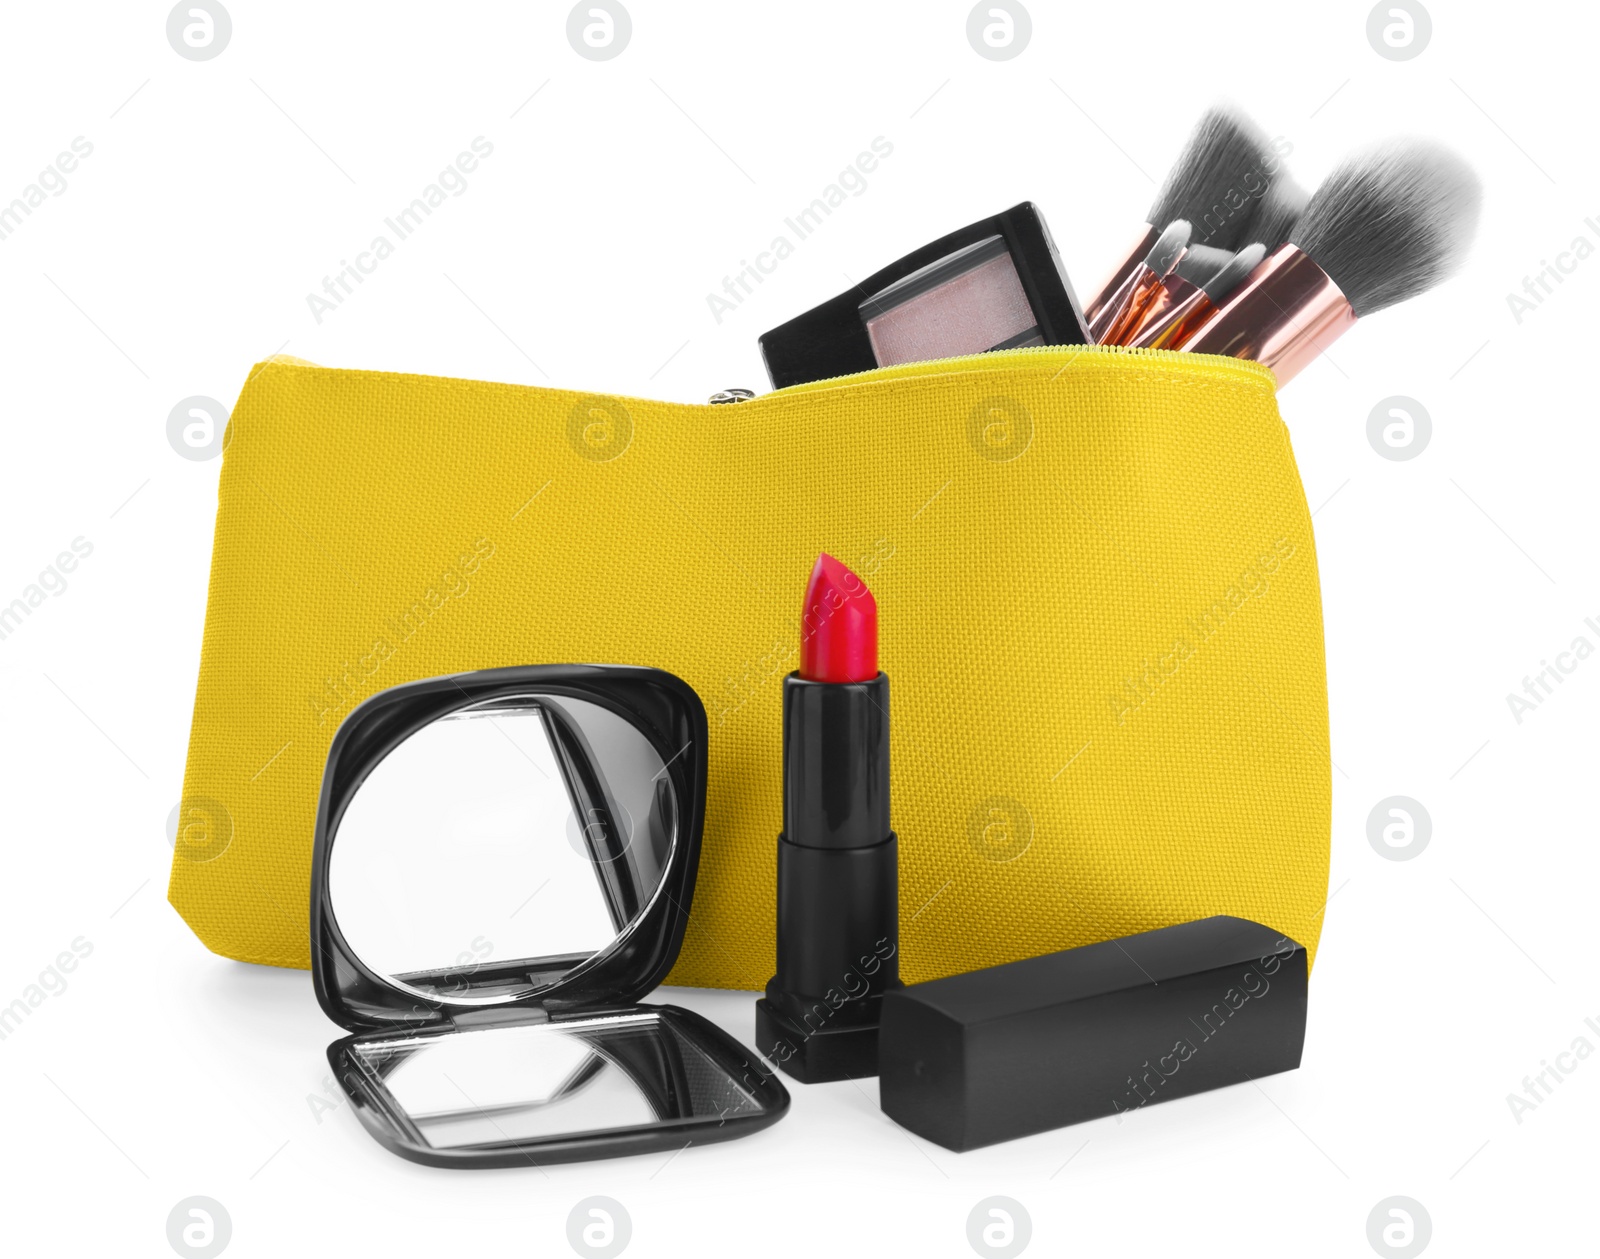 Photo of Stylish pocket mirror and cosmetic bag with makeup products on white background